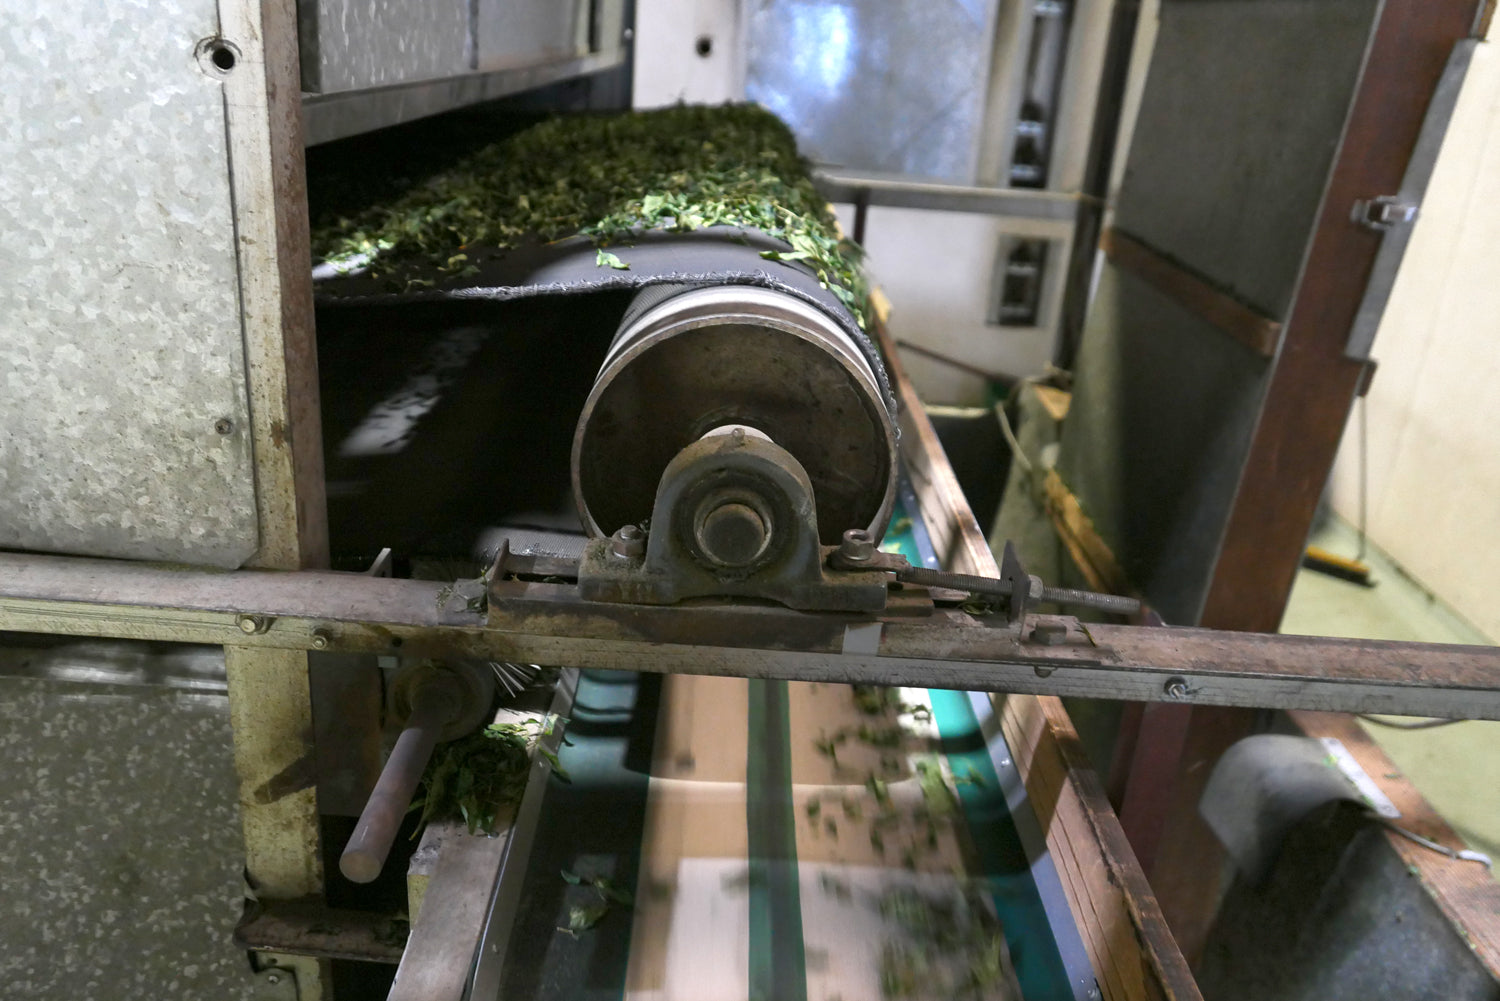 Dried matcha leaves roll off of a conveyor belt.